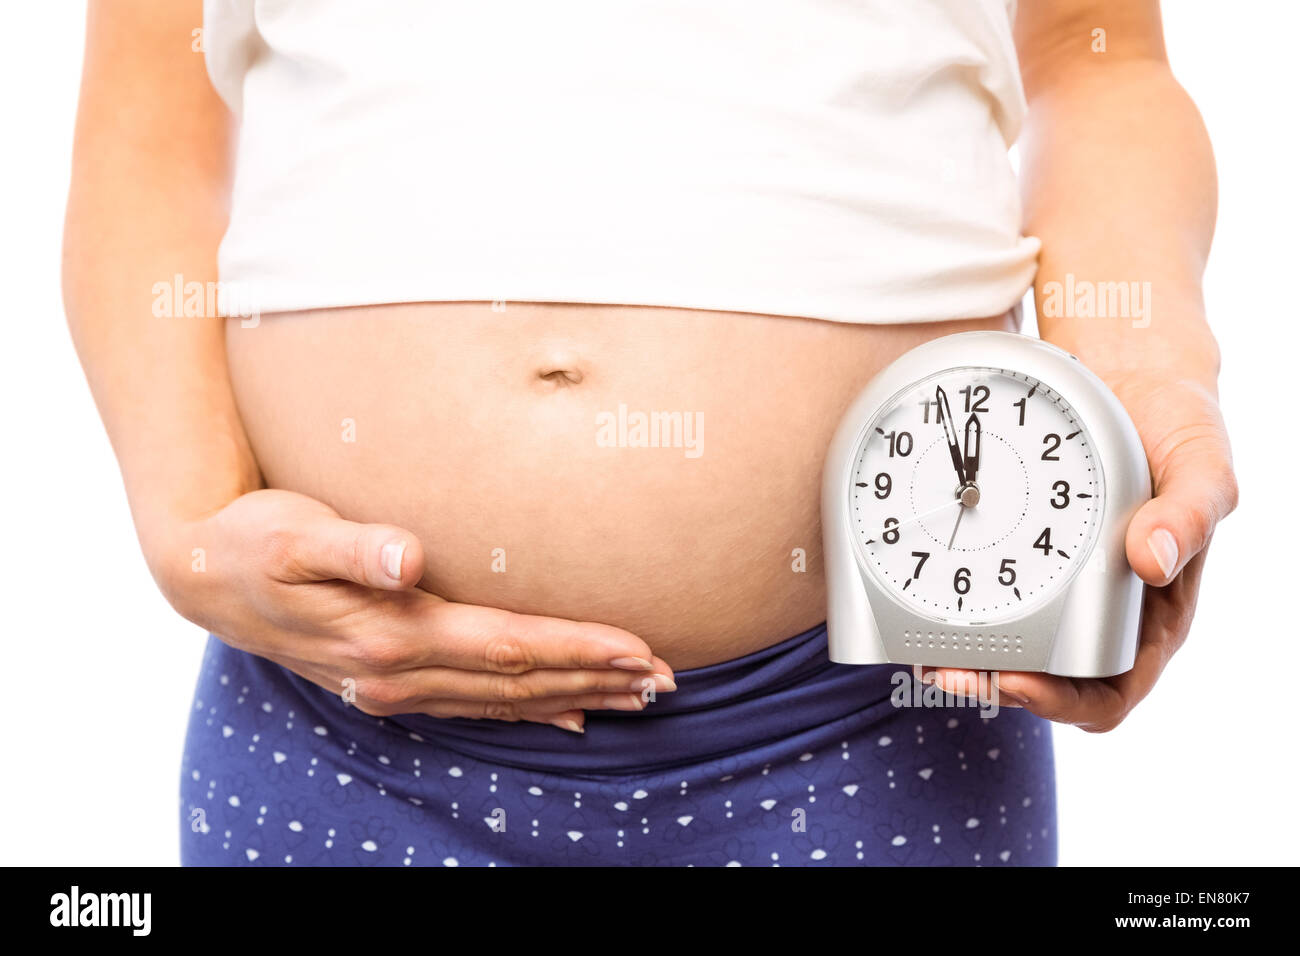 Pregnant woman showing clock and bump Stock Photo